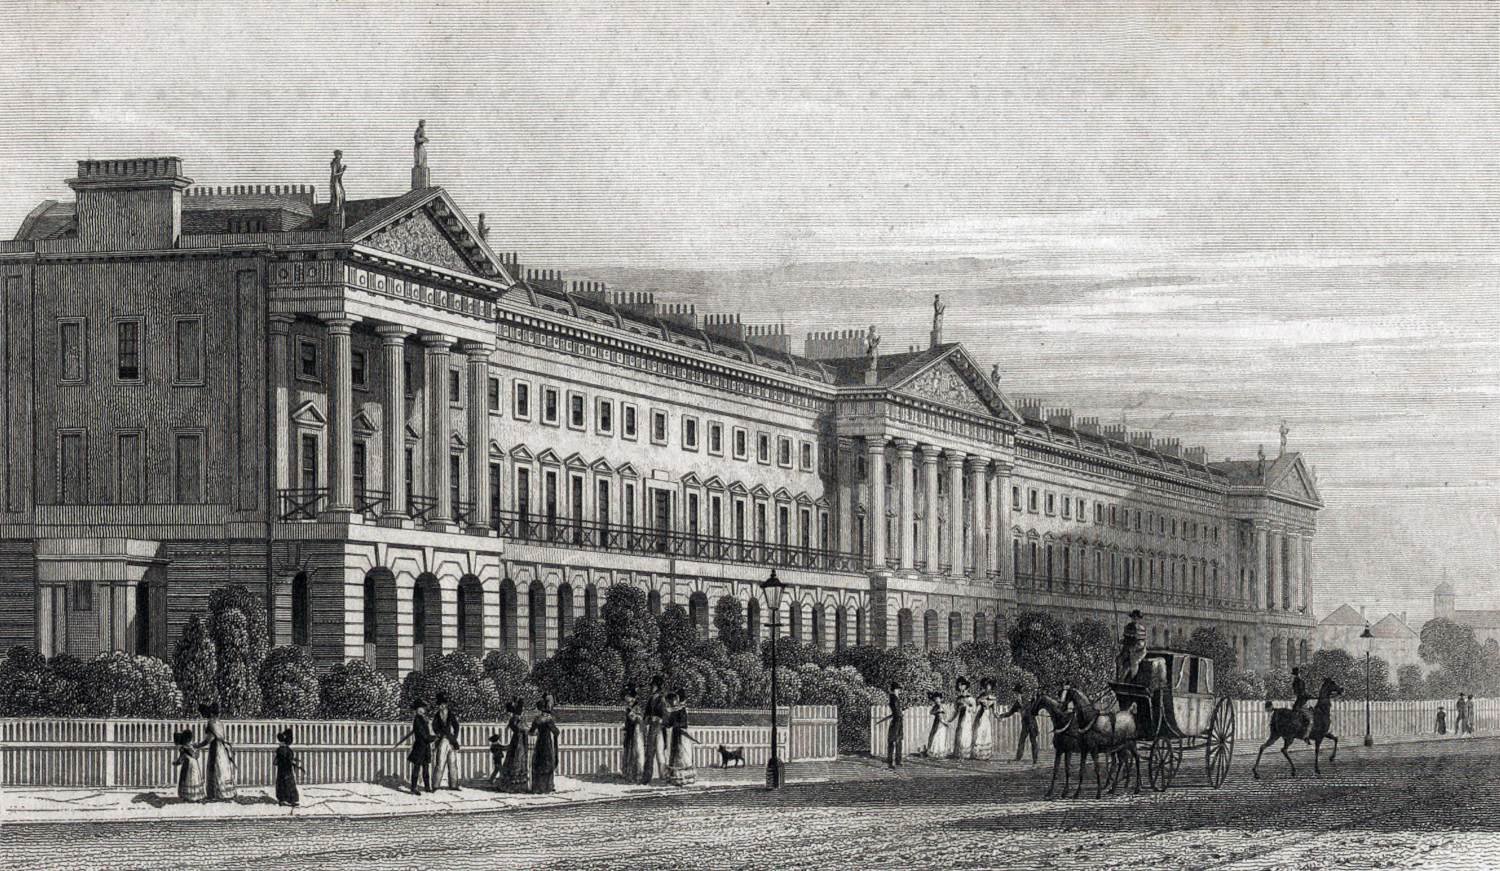 Hanover Terrace, London from TheGenealogist's Image Archive